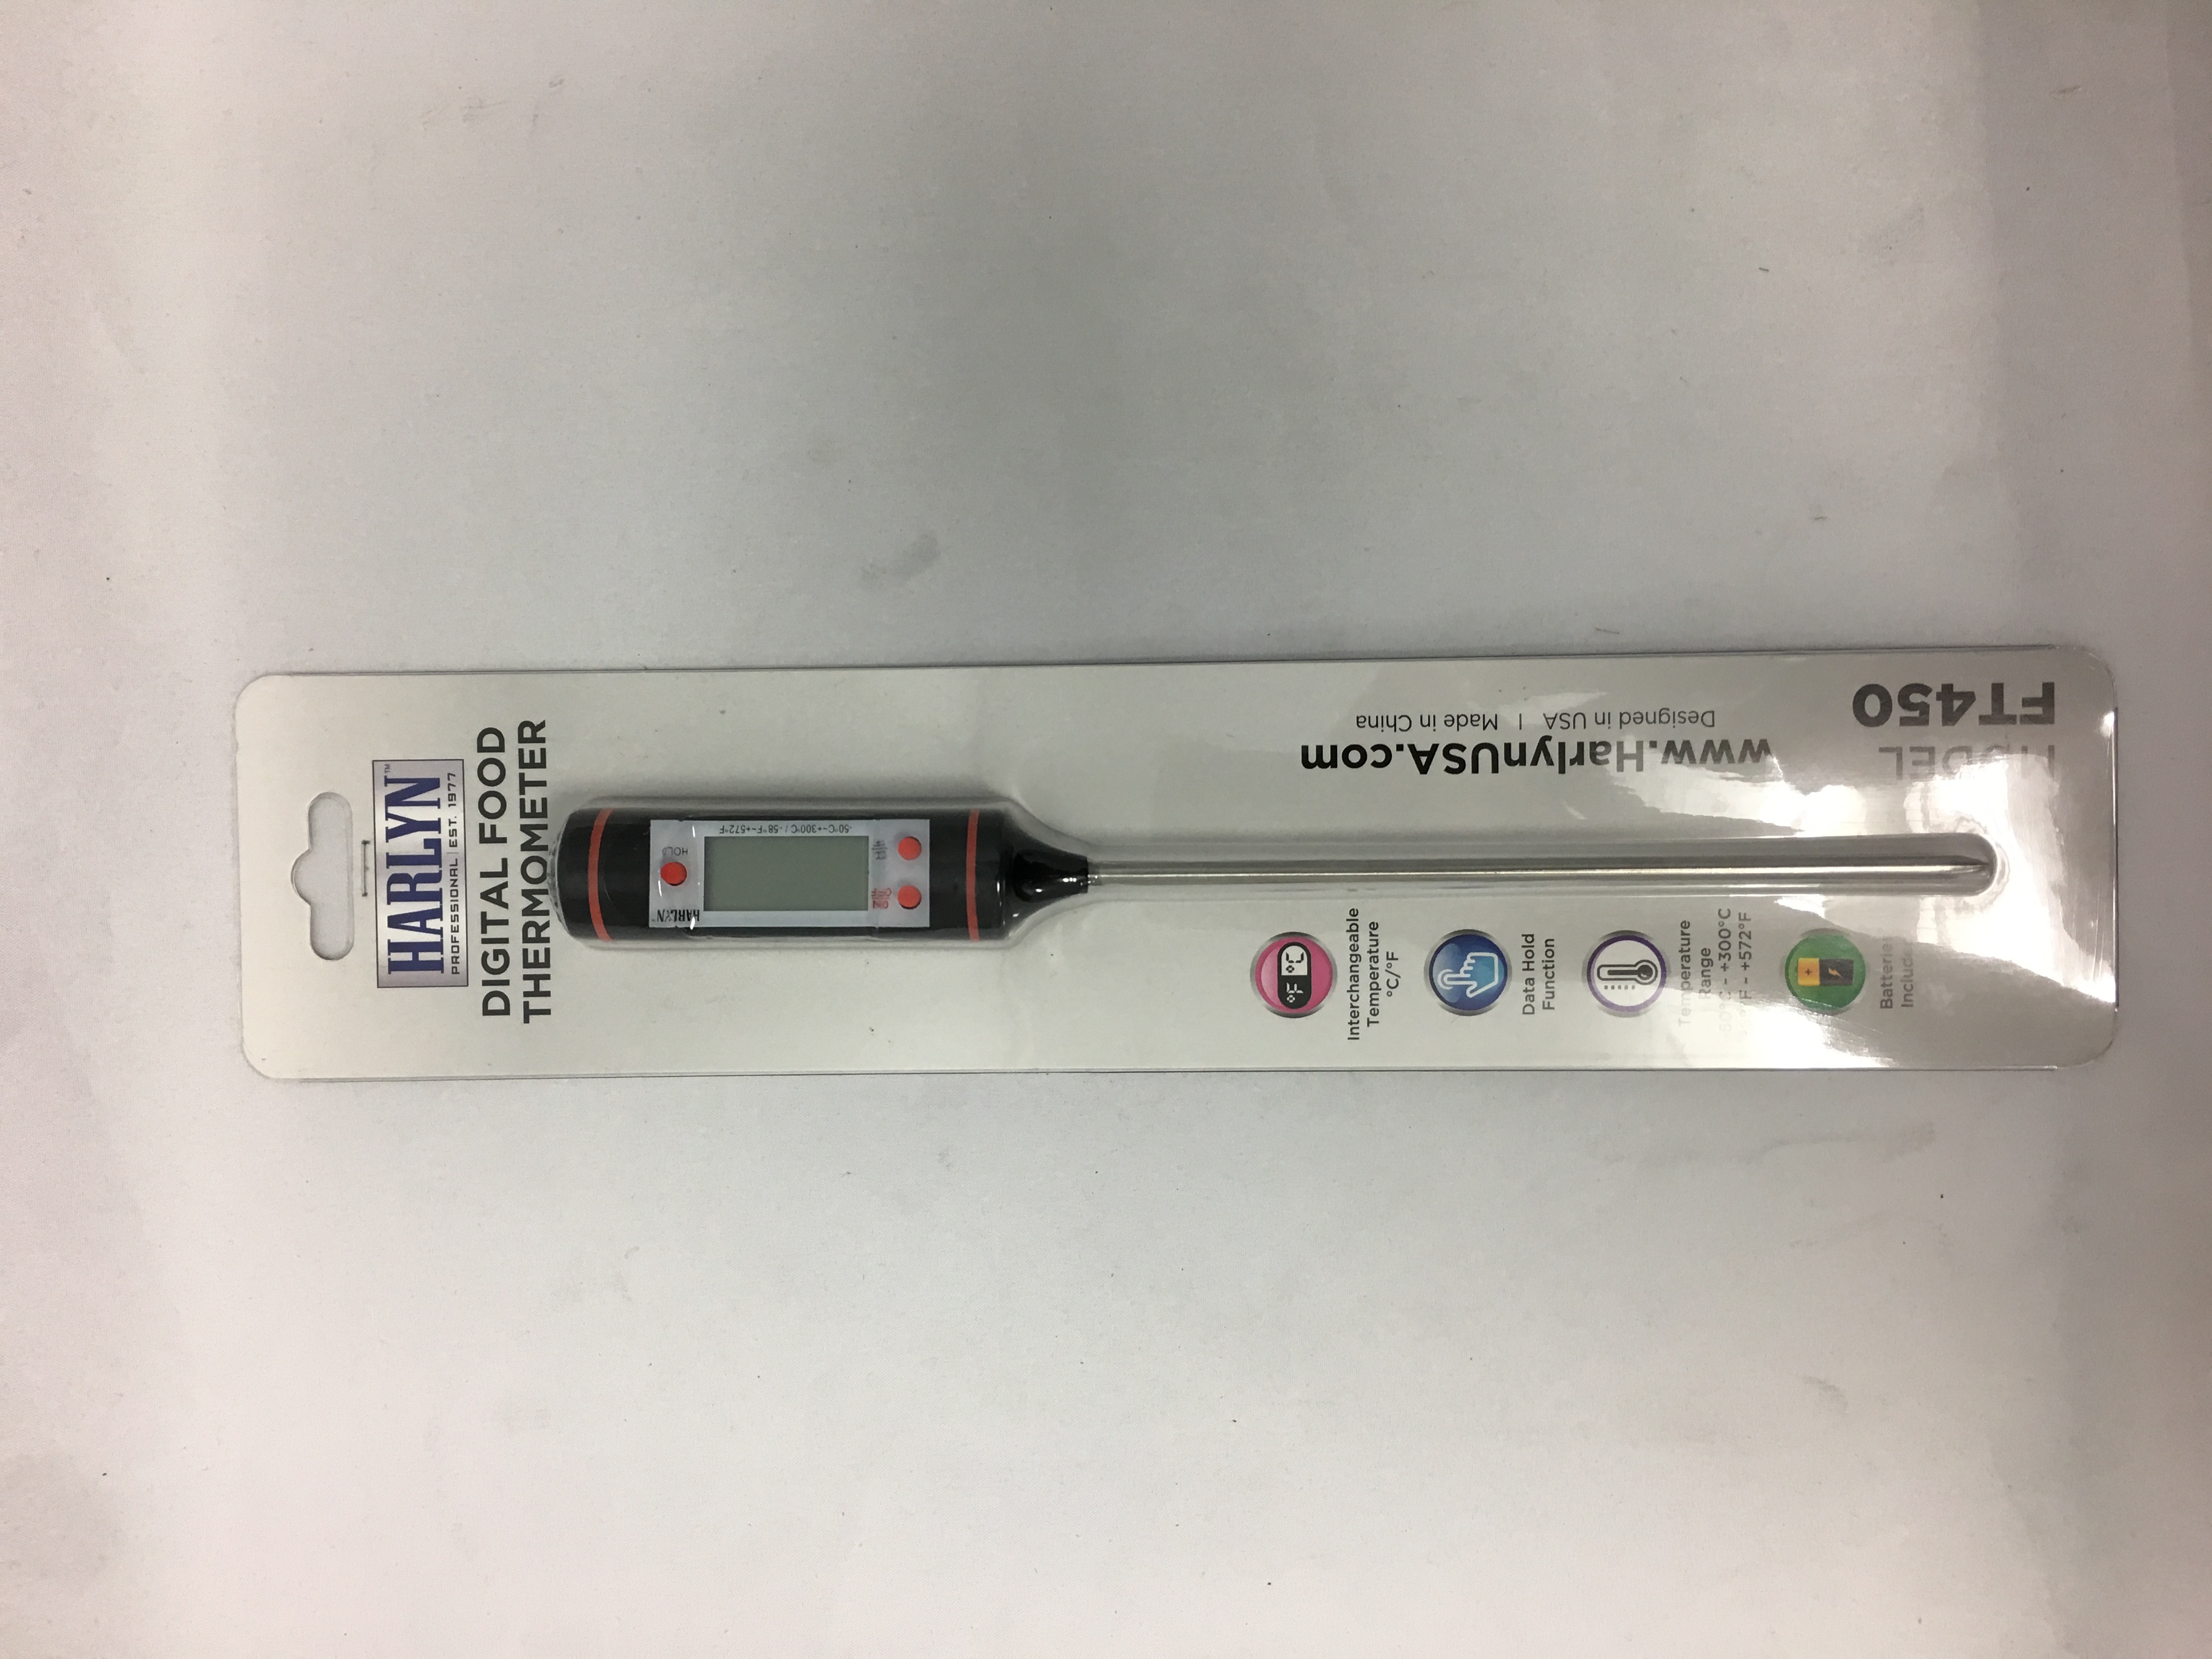 Harlyn FT450 Instant-Read Digital Meat/Food Thermometer - Digital LCD -  Kitchen, Indoor, Outdoor Cooking - Grill and BBQ [FT450] - $6.95 : Discount  Pharmacy Supplies, Vial Bottle, Rx Bag, Rx Folder, Wholesale Pharmacy  Supplies